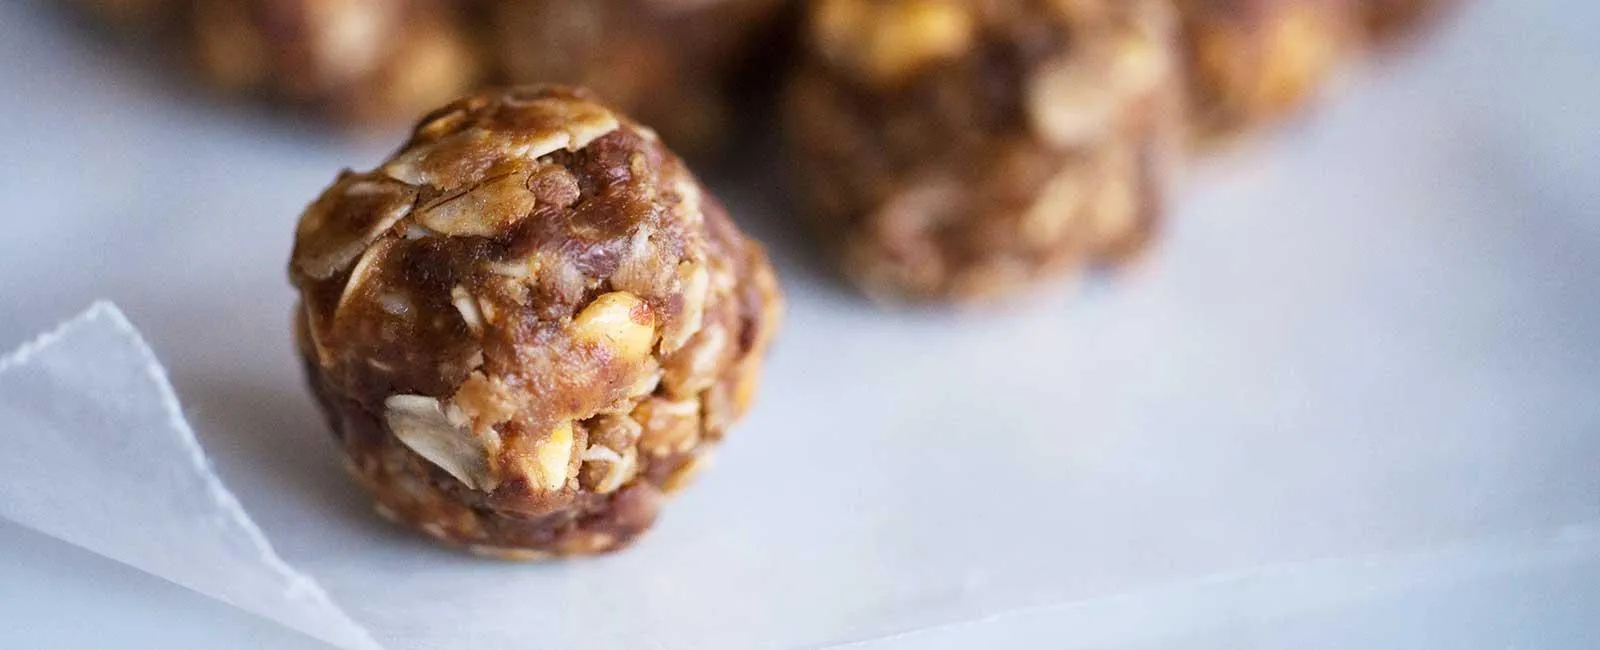 Peanut Butter, Grape and Chocolate Snack Bites 